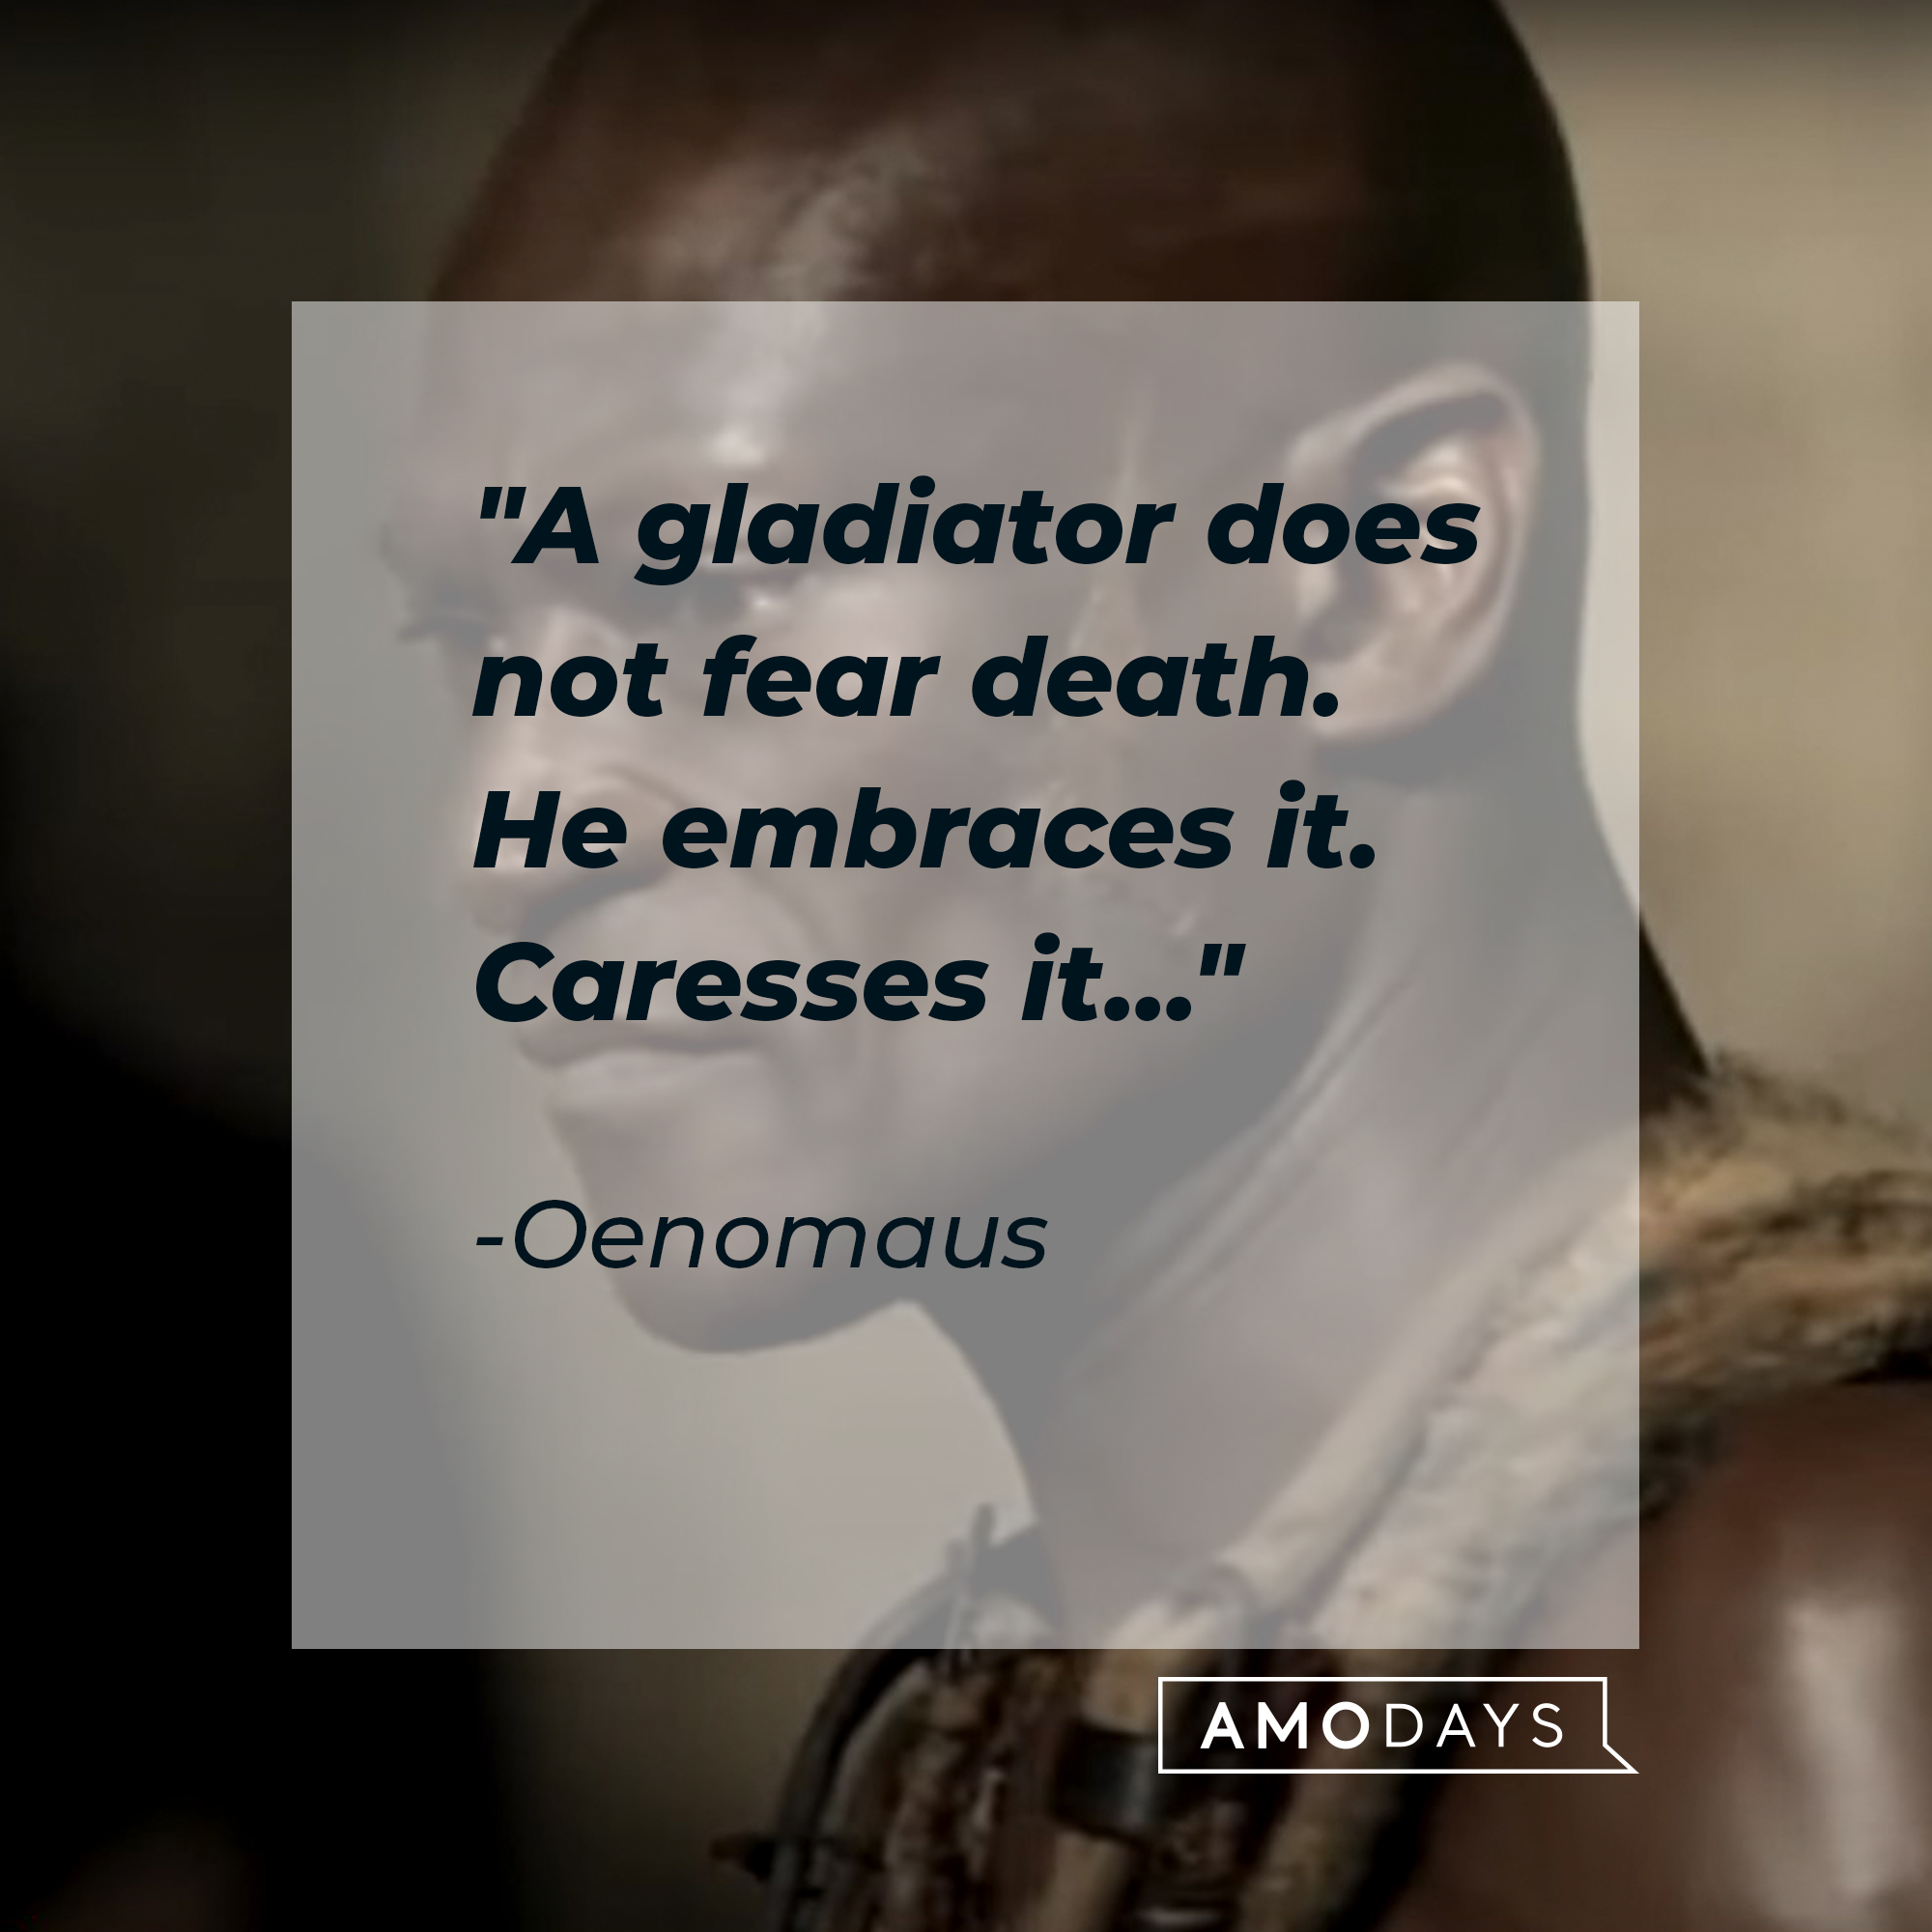 An image of the character Oenomaus with his quote: "A gladiator does not fear death. He embraces it. Caresses it..." |Source: youtube.com/Starz